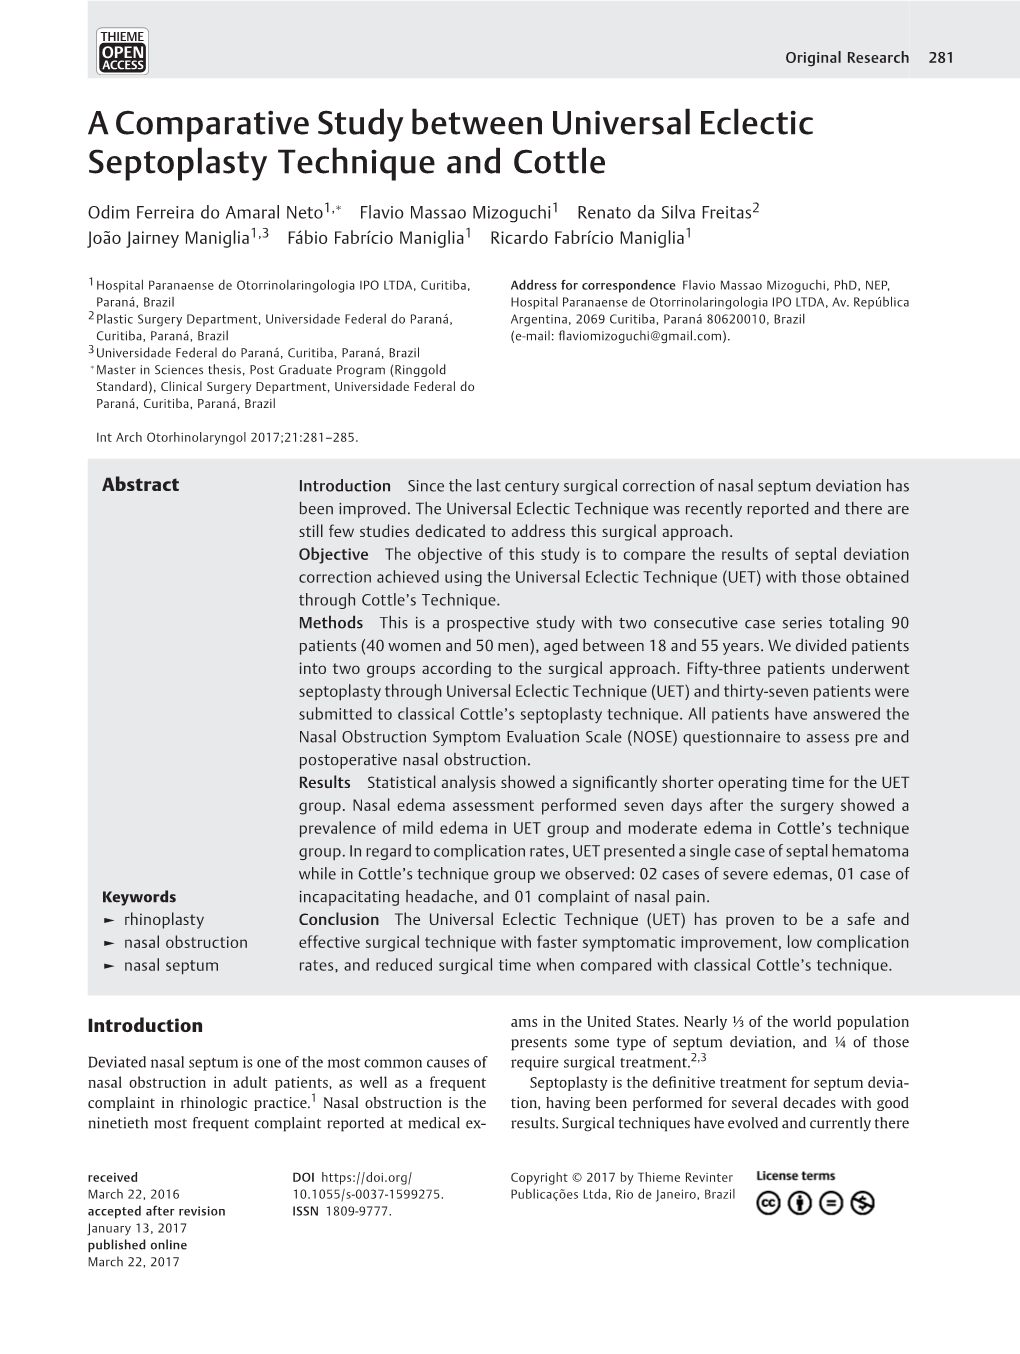 A Comparative Study Between Universal Eclectic Septoplasty Technique and Cottle